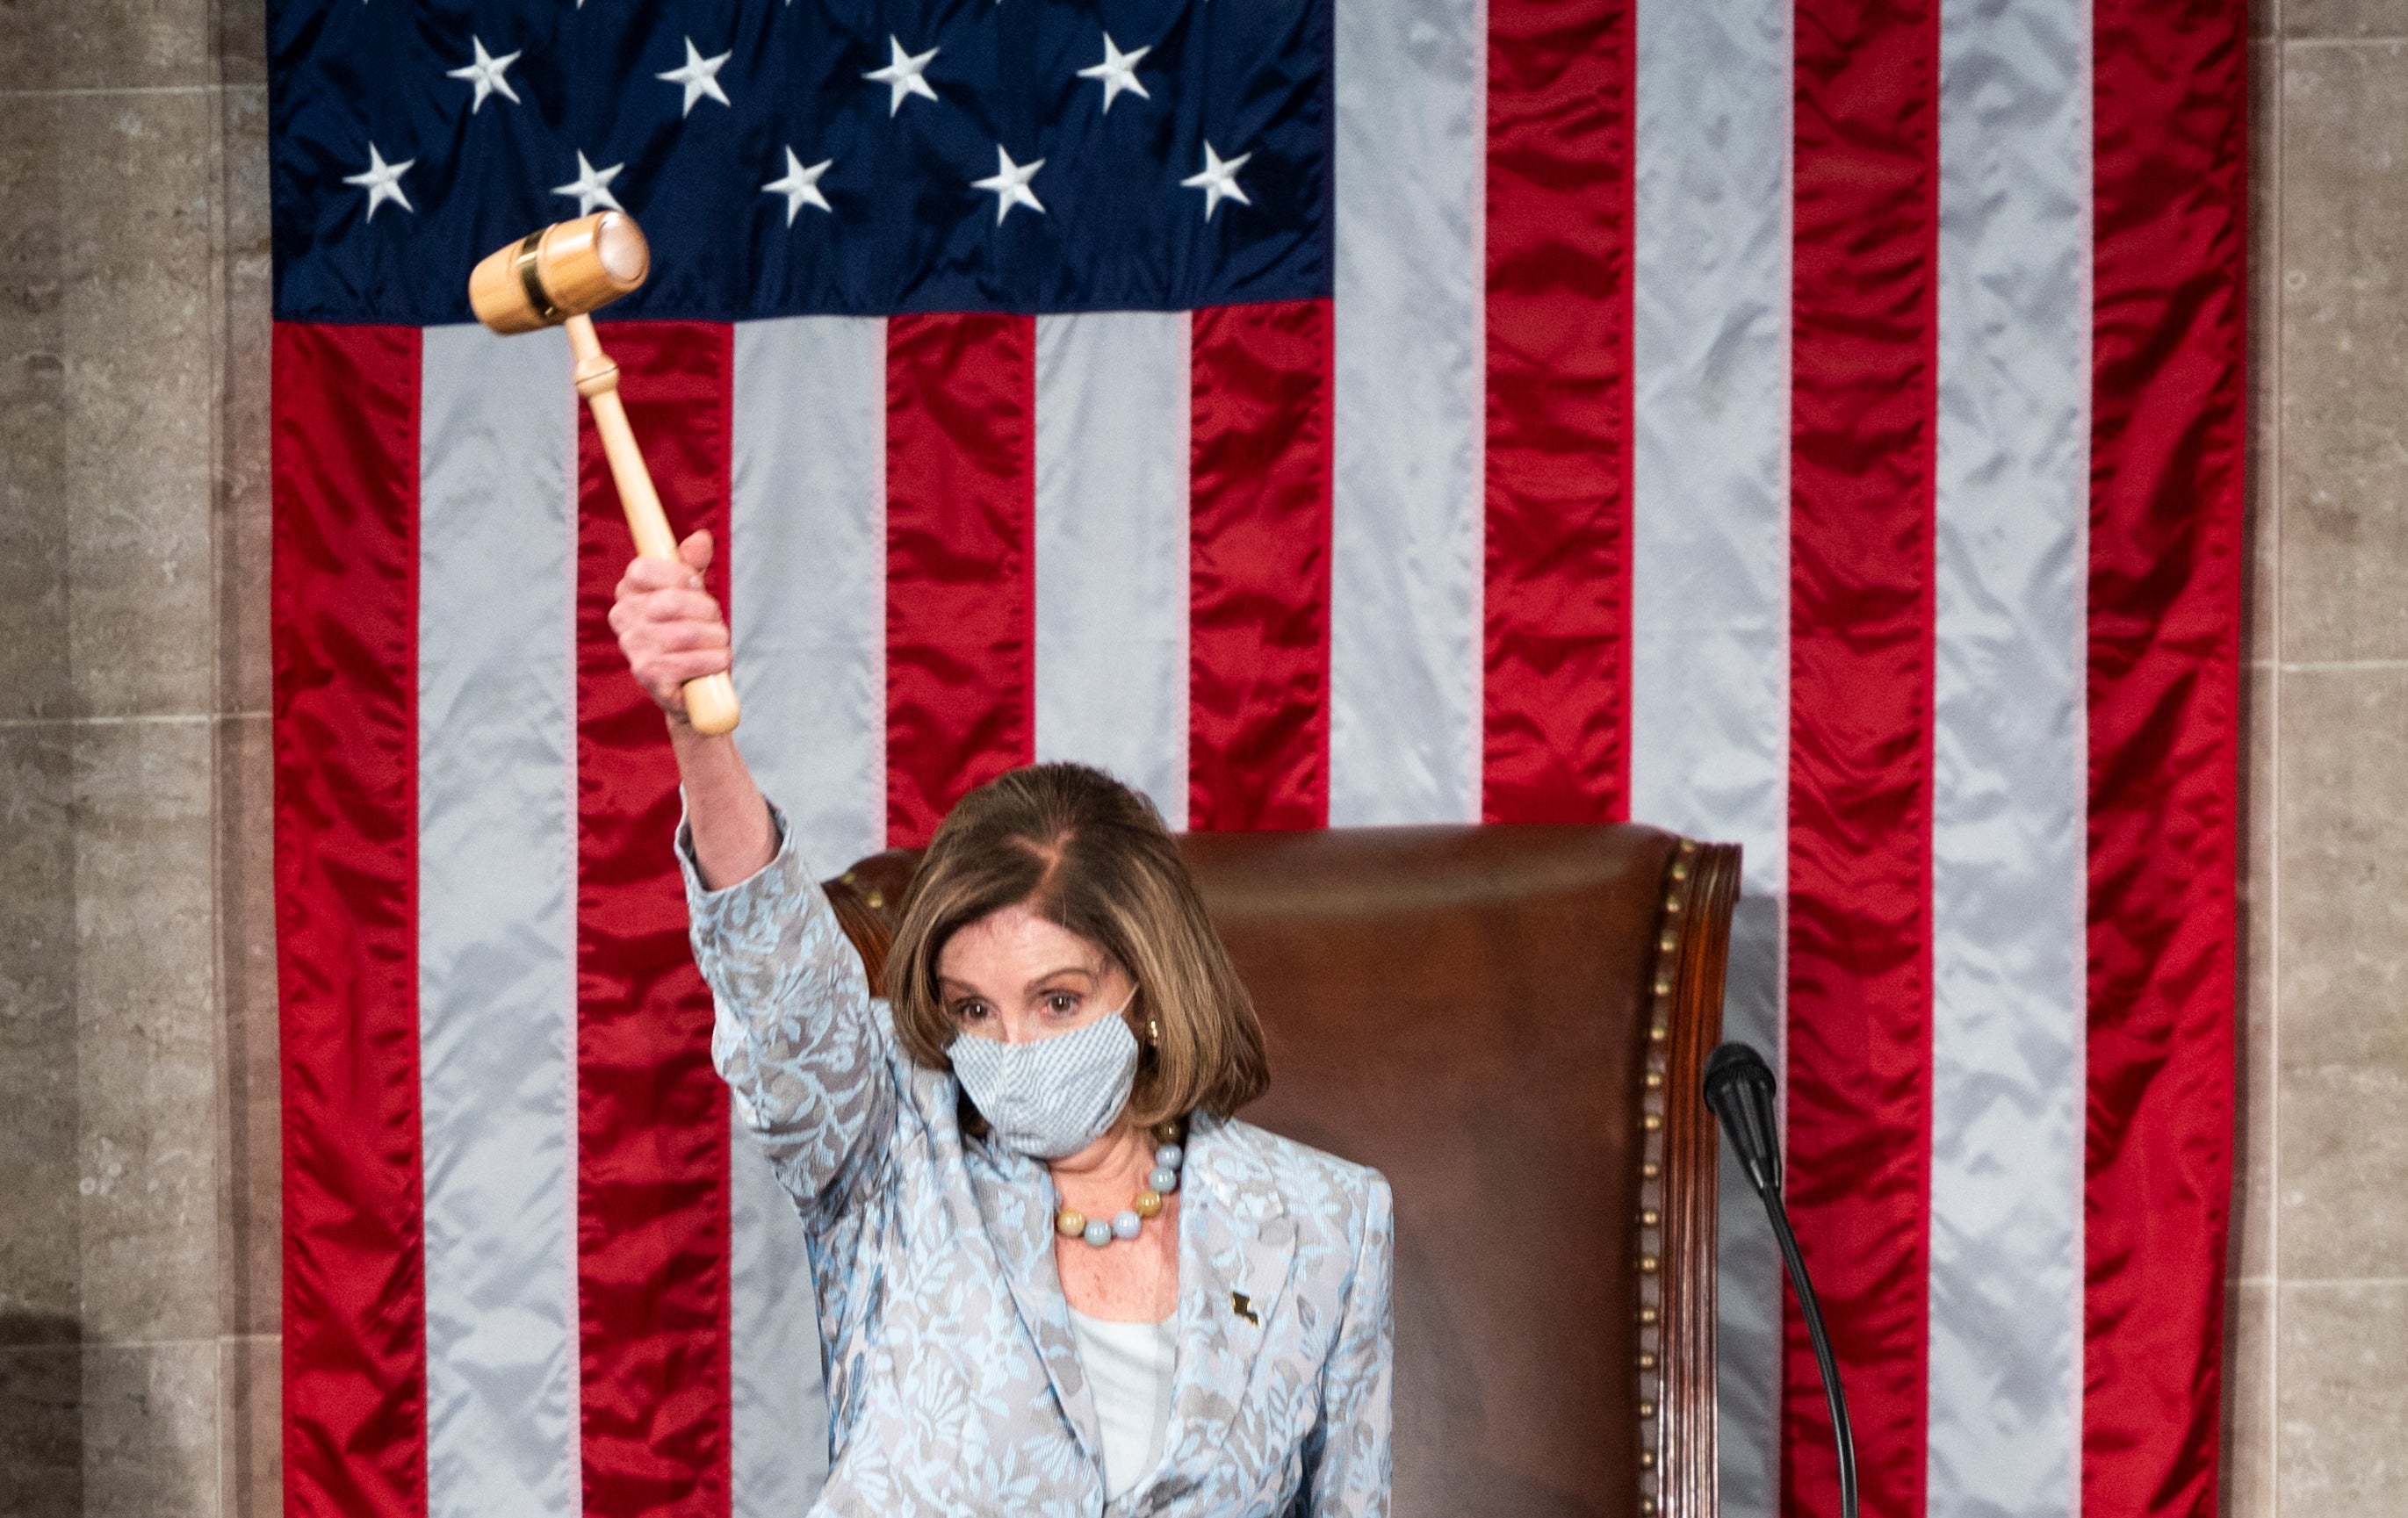 Speaker of the House Nancy Pelosi of Calif., waves the gavel on the opening day of the 117th Congress on Capitol Hill in Washington, Sunday, Jan. 3, 2021